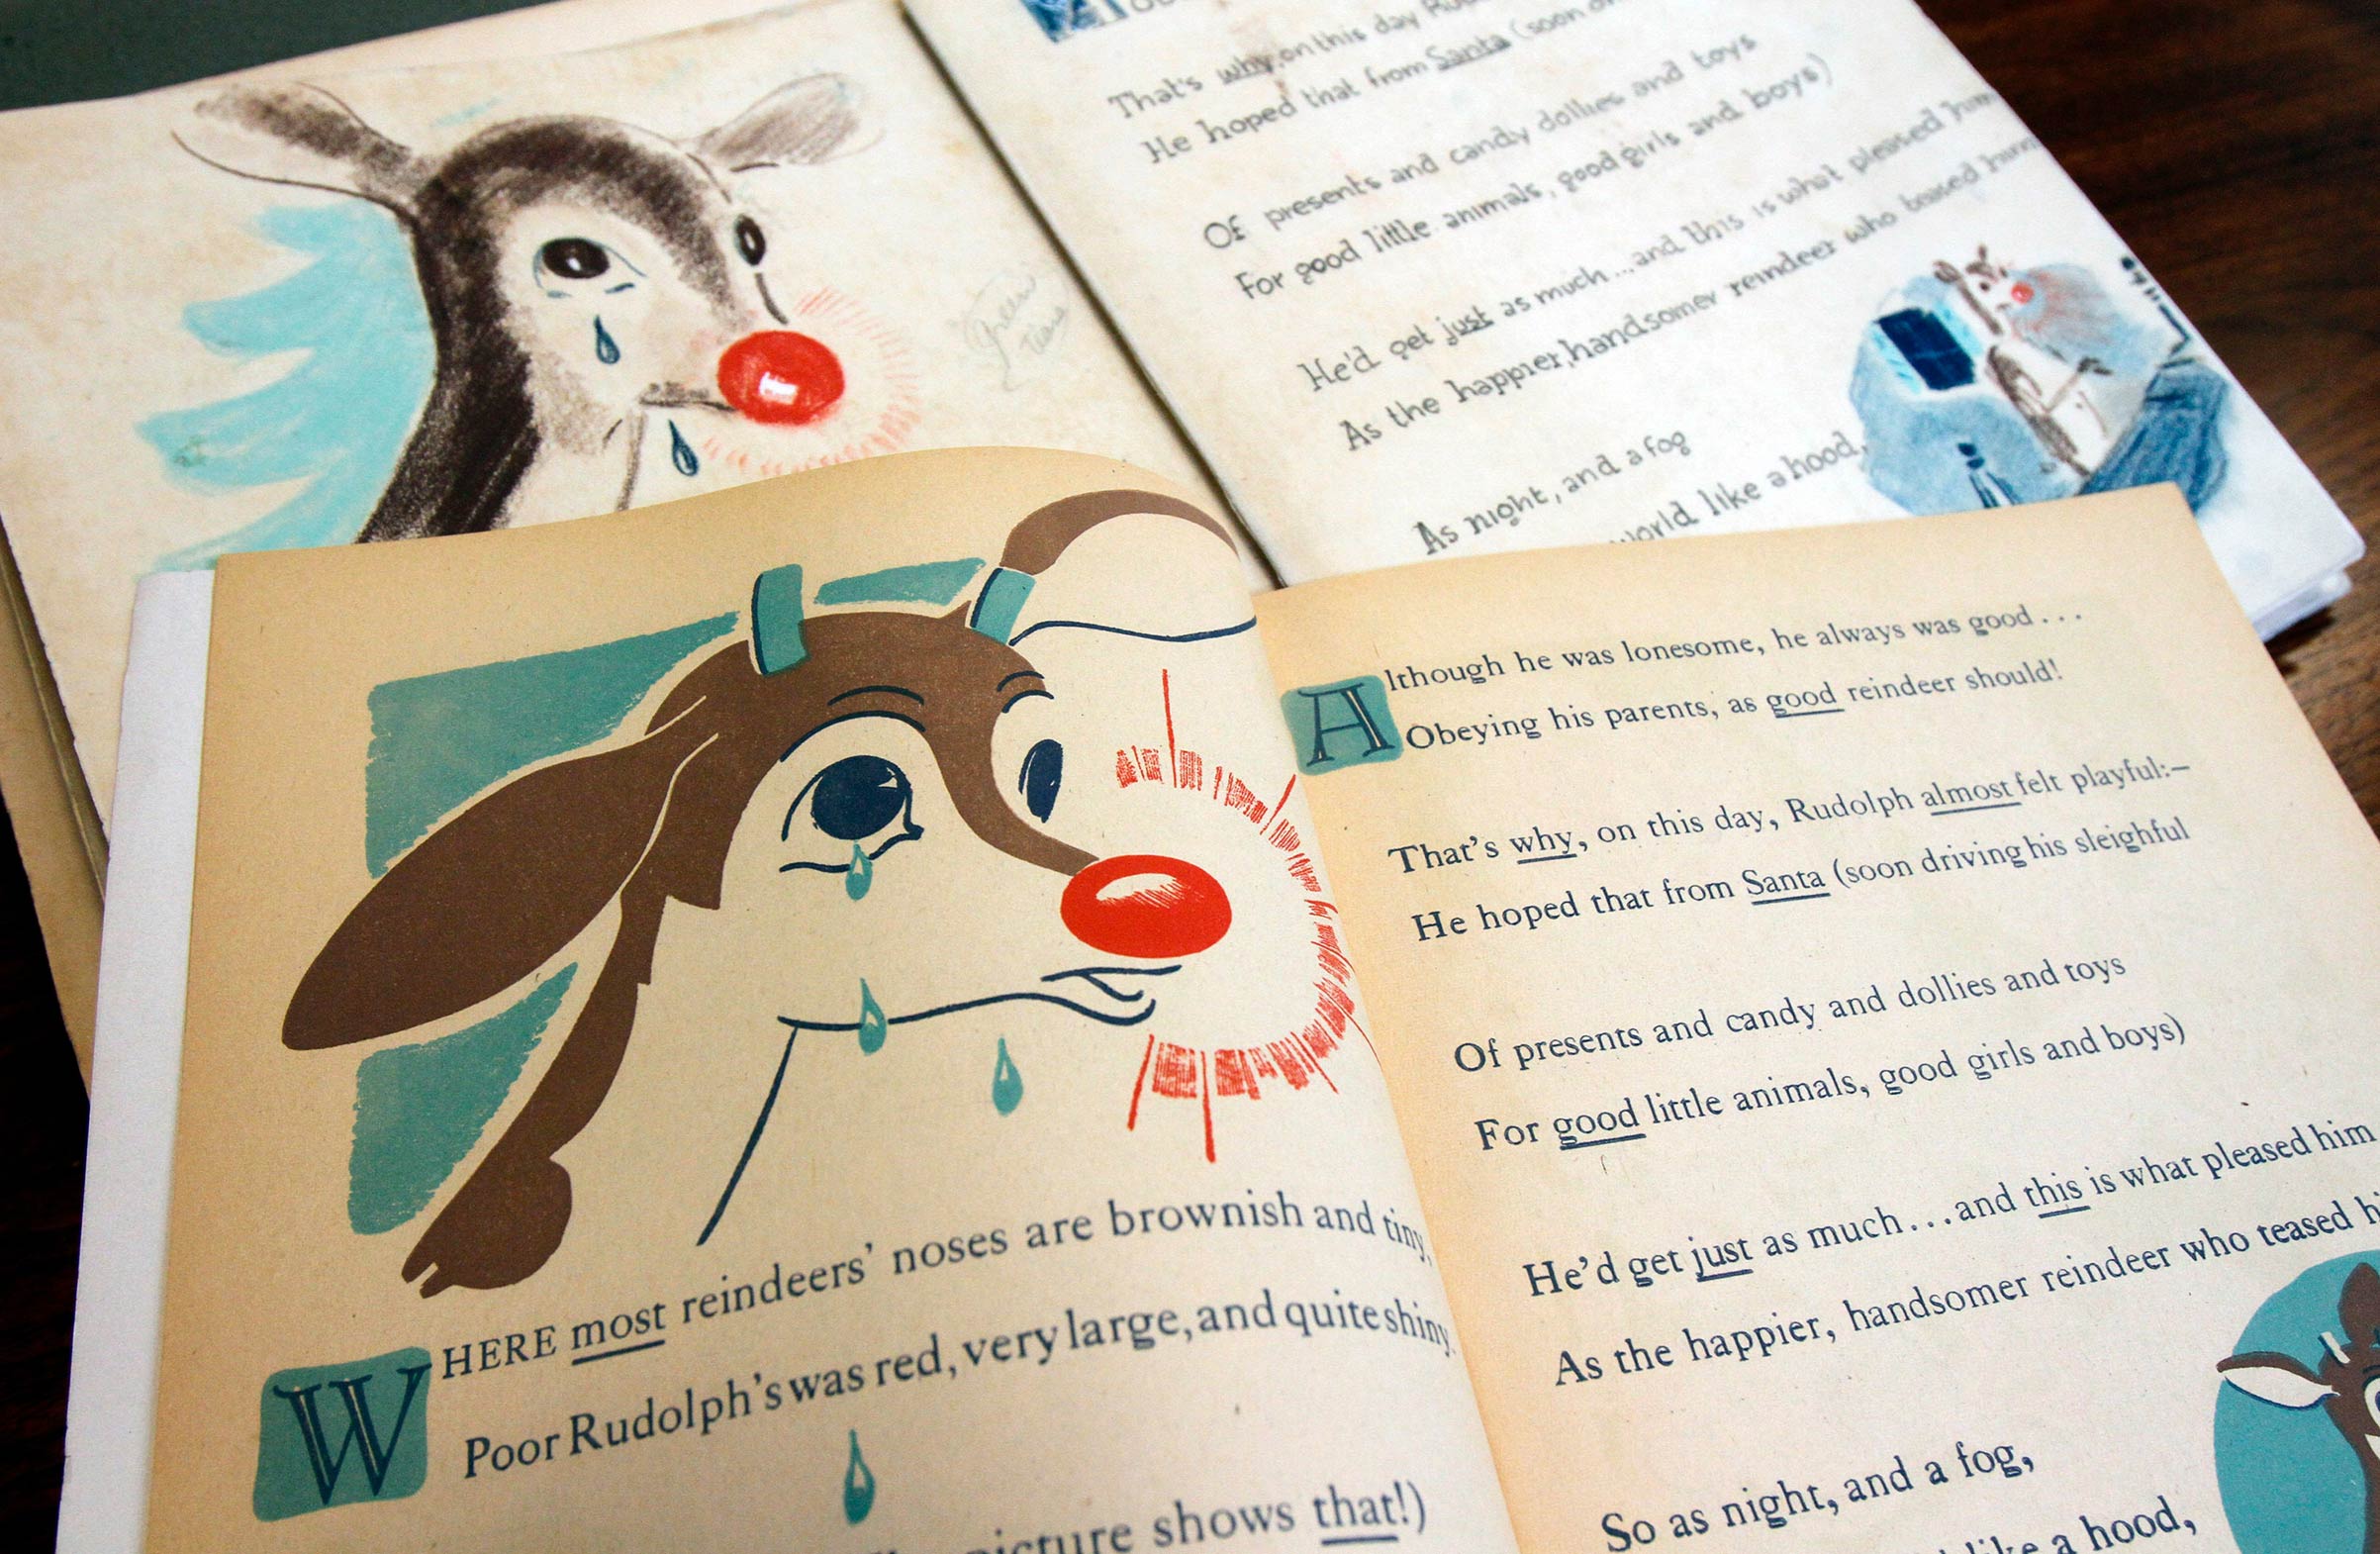 A first edition of "Rudolph, the Red-Nosed Reindeer", bottom, and an original layout, top, on Dec. 20, 2011, at Dartmouth College in the Rauner Special Collections Library in Hanover, N.H. (Toby Talbot/AP—Shutterstock)